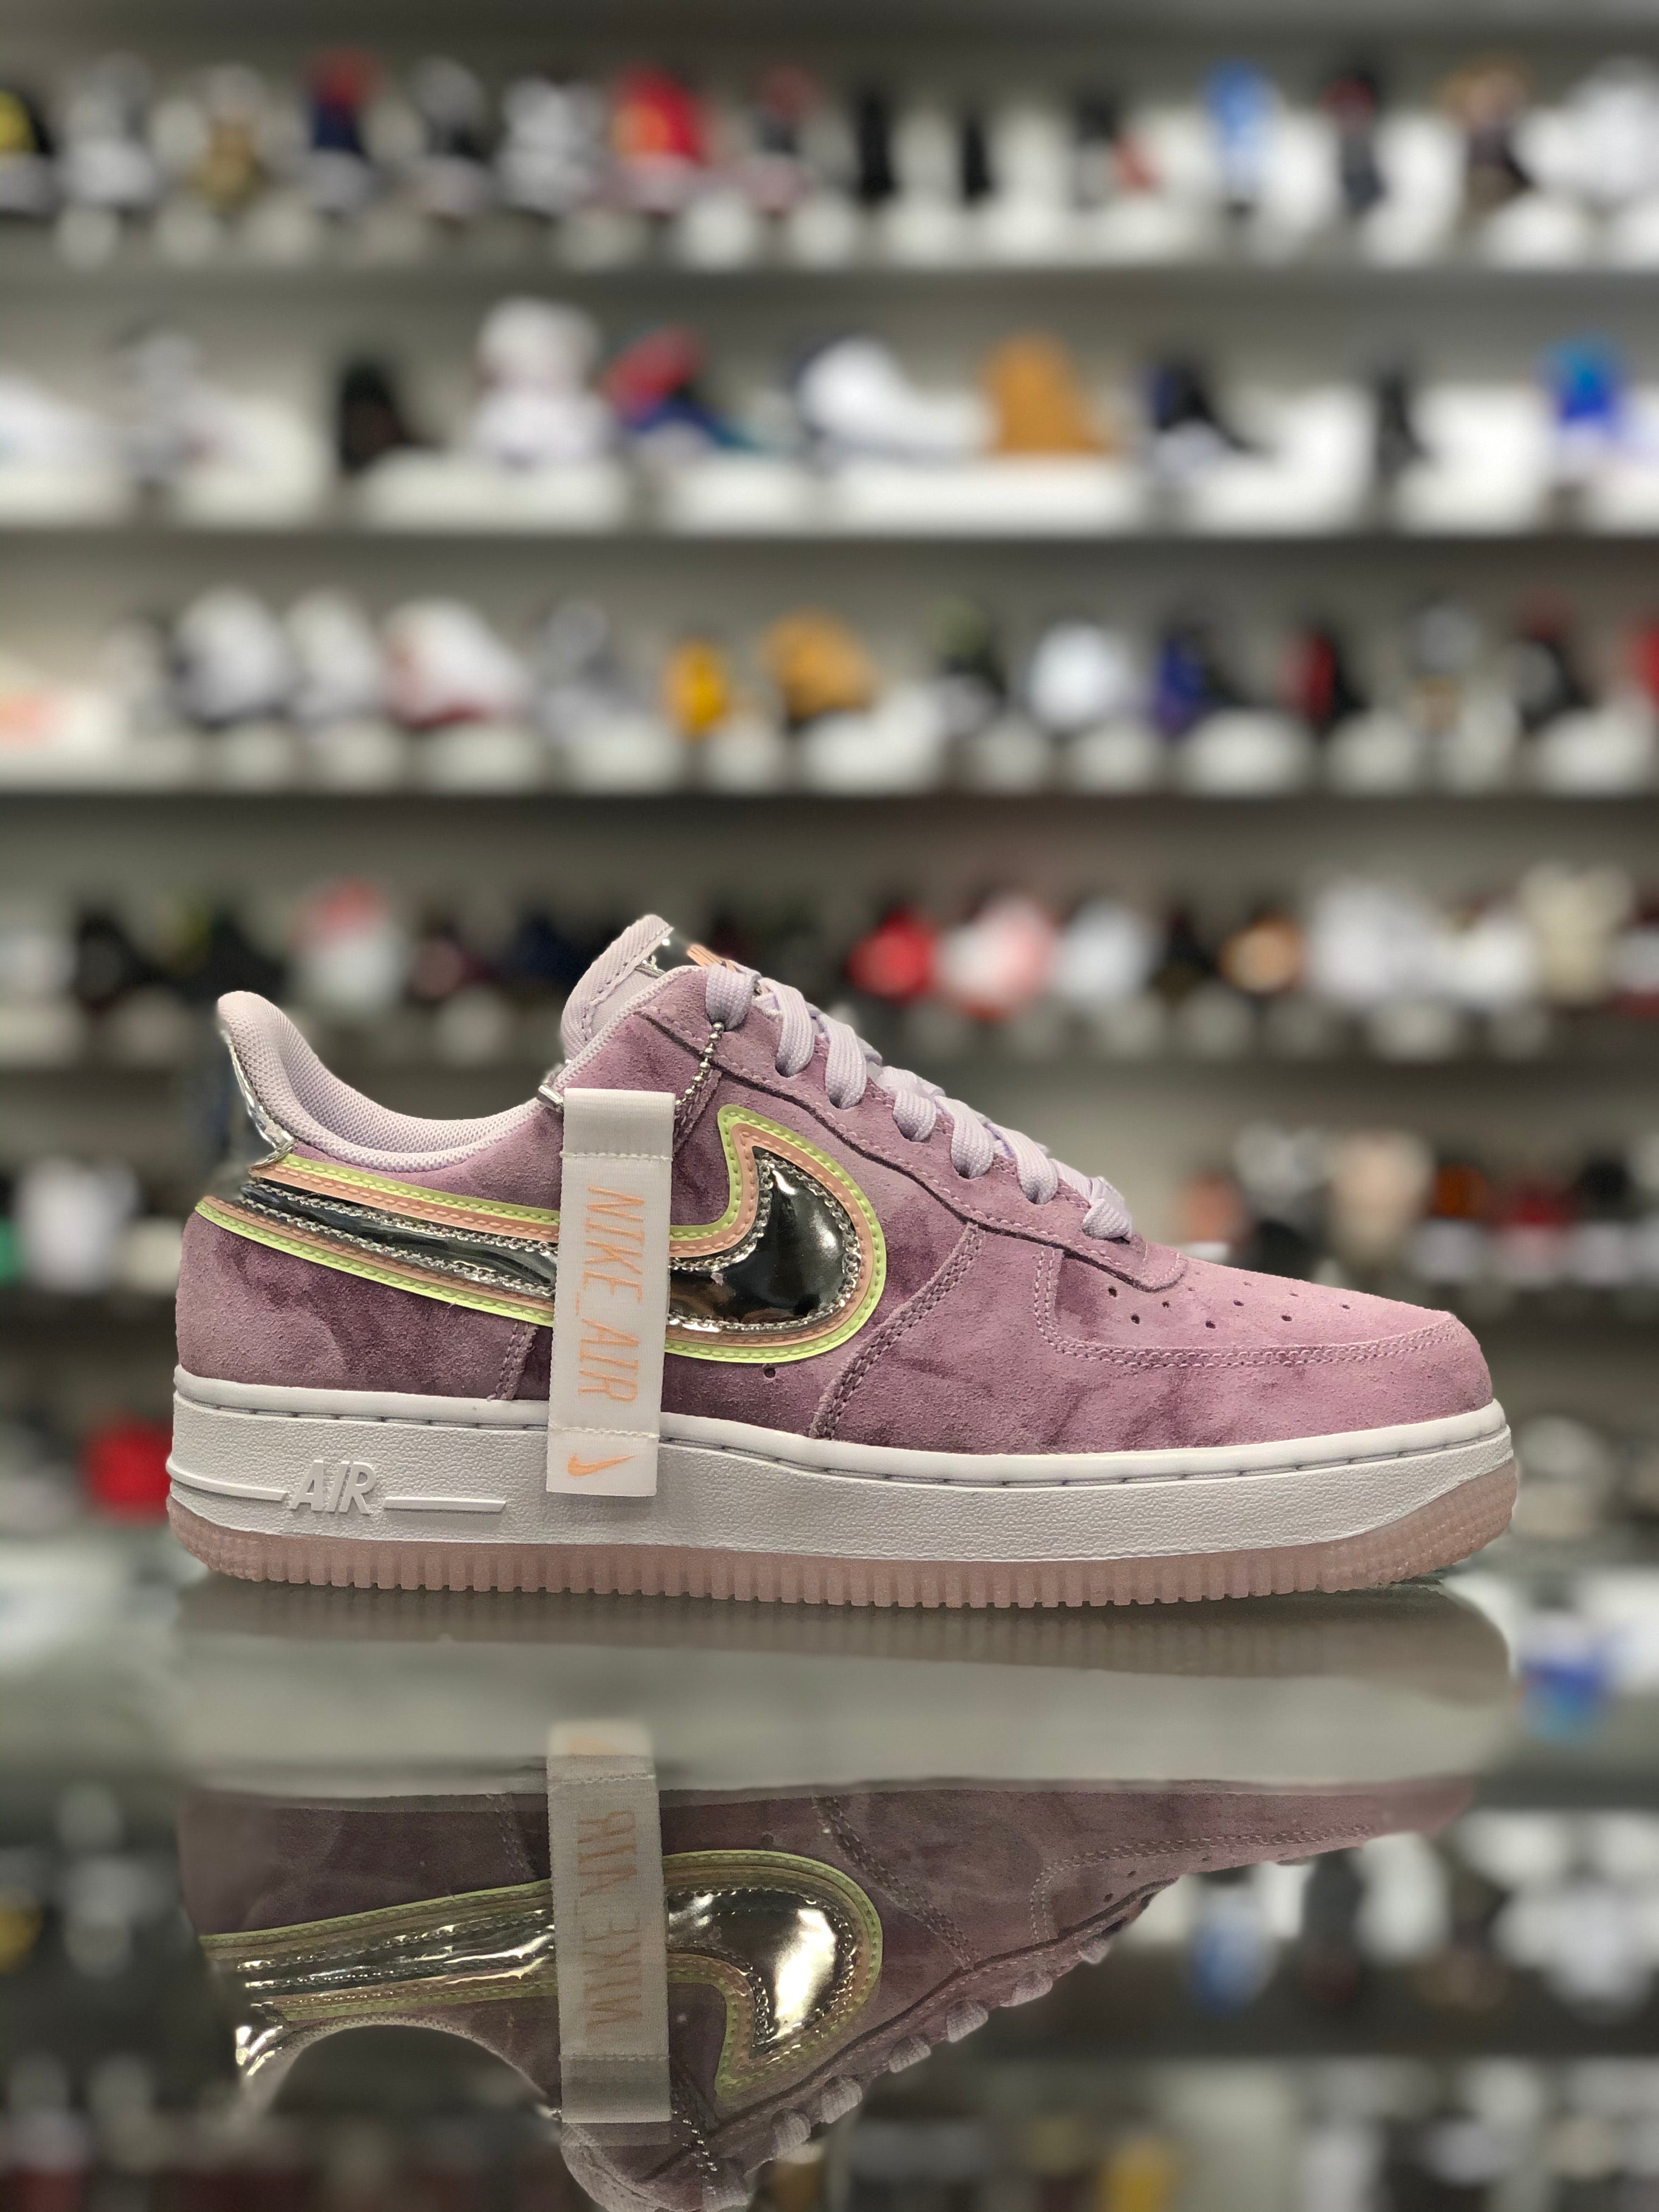 Nike Air Force 1 “P(HER)SPECTIVE